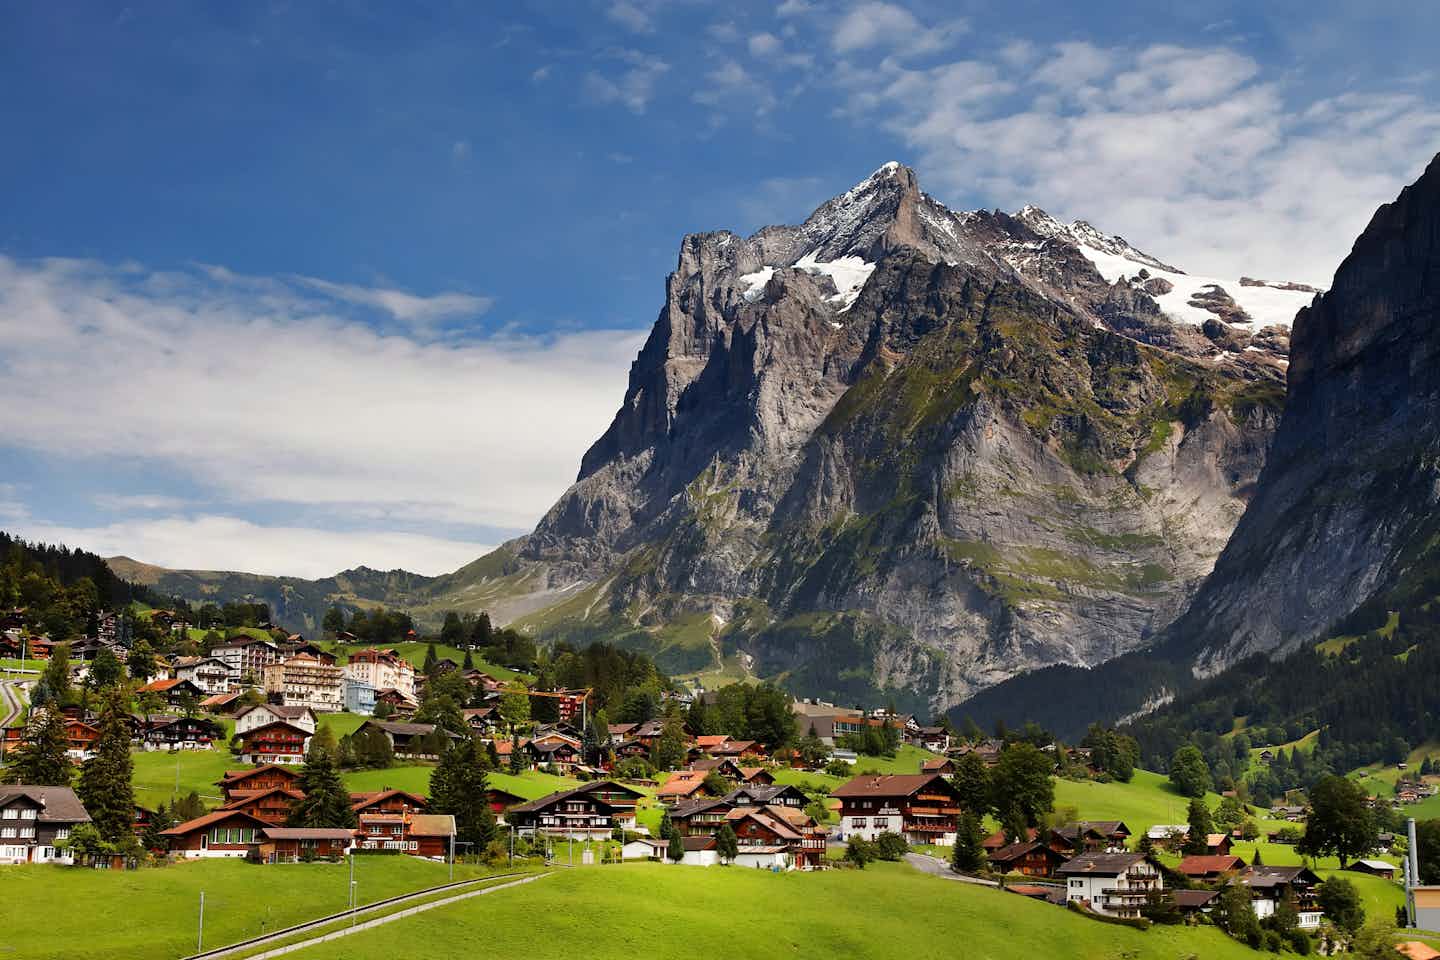 Camping in Grindelwald